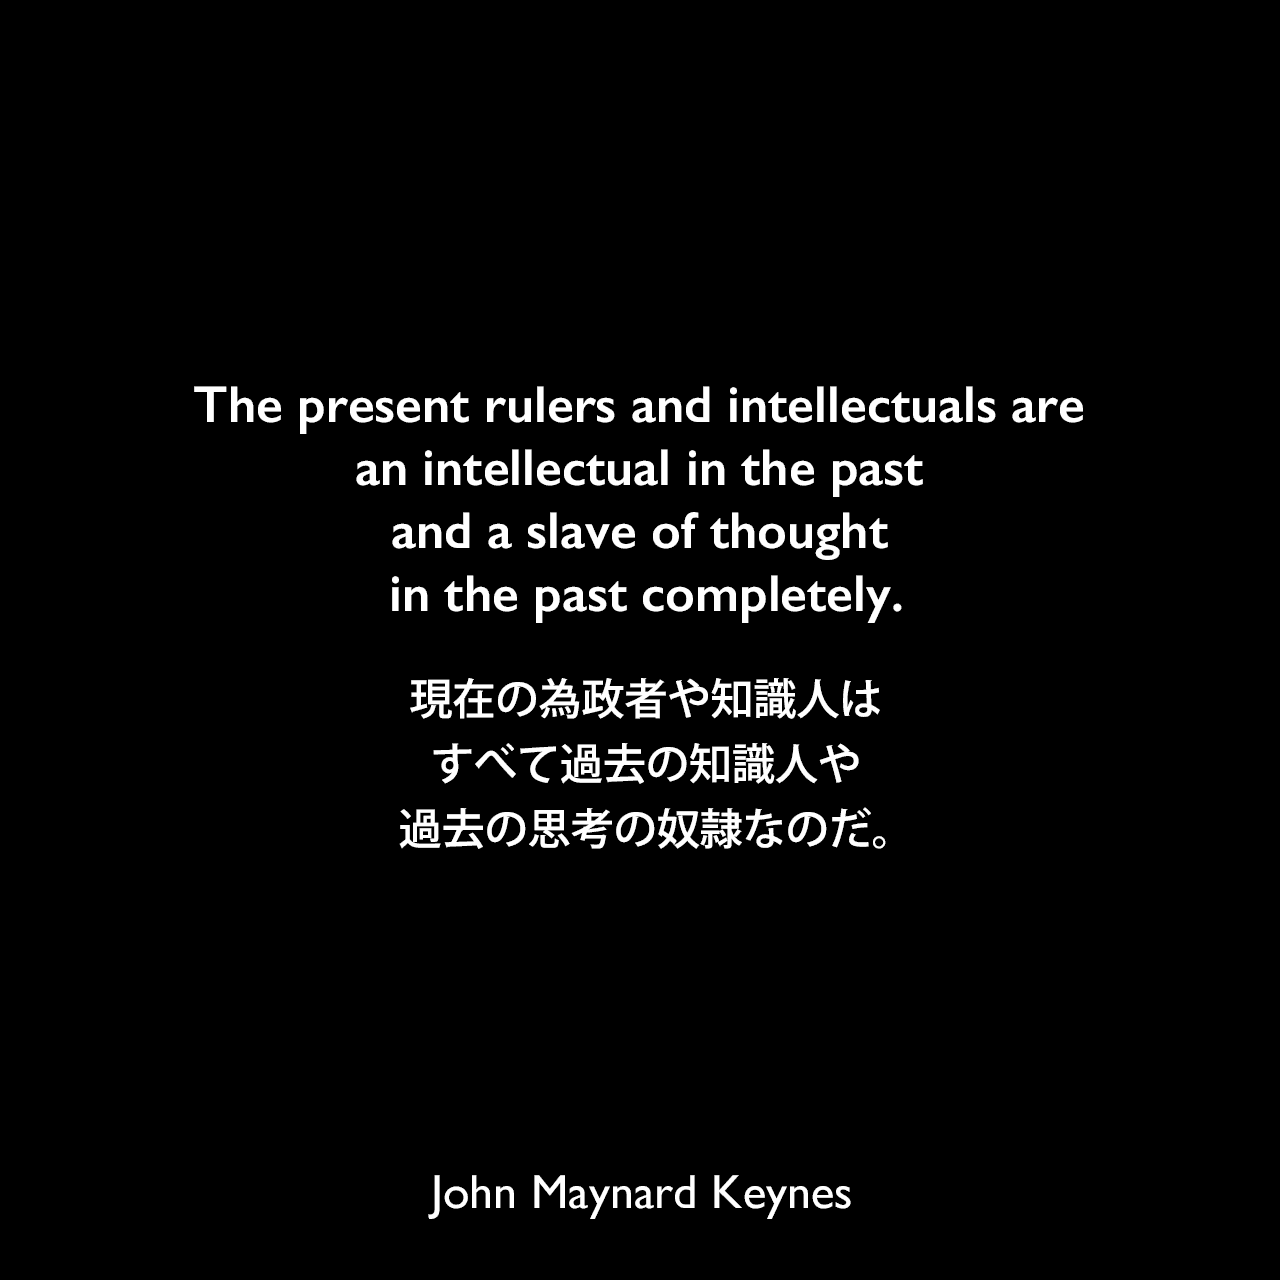 The present rulers and intellectuals are an intellectual in the past and a slave of thought in the past completely.現在の為政者や知識人は、すべて過去の知識人や過去の思考の奴隷なのだ。John Maynard Keynes